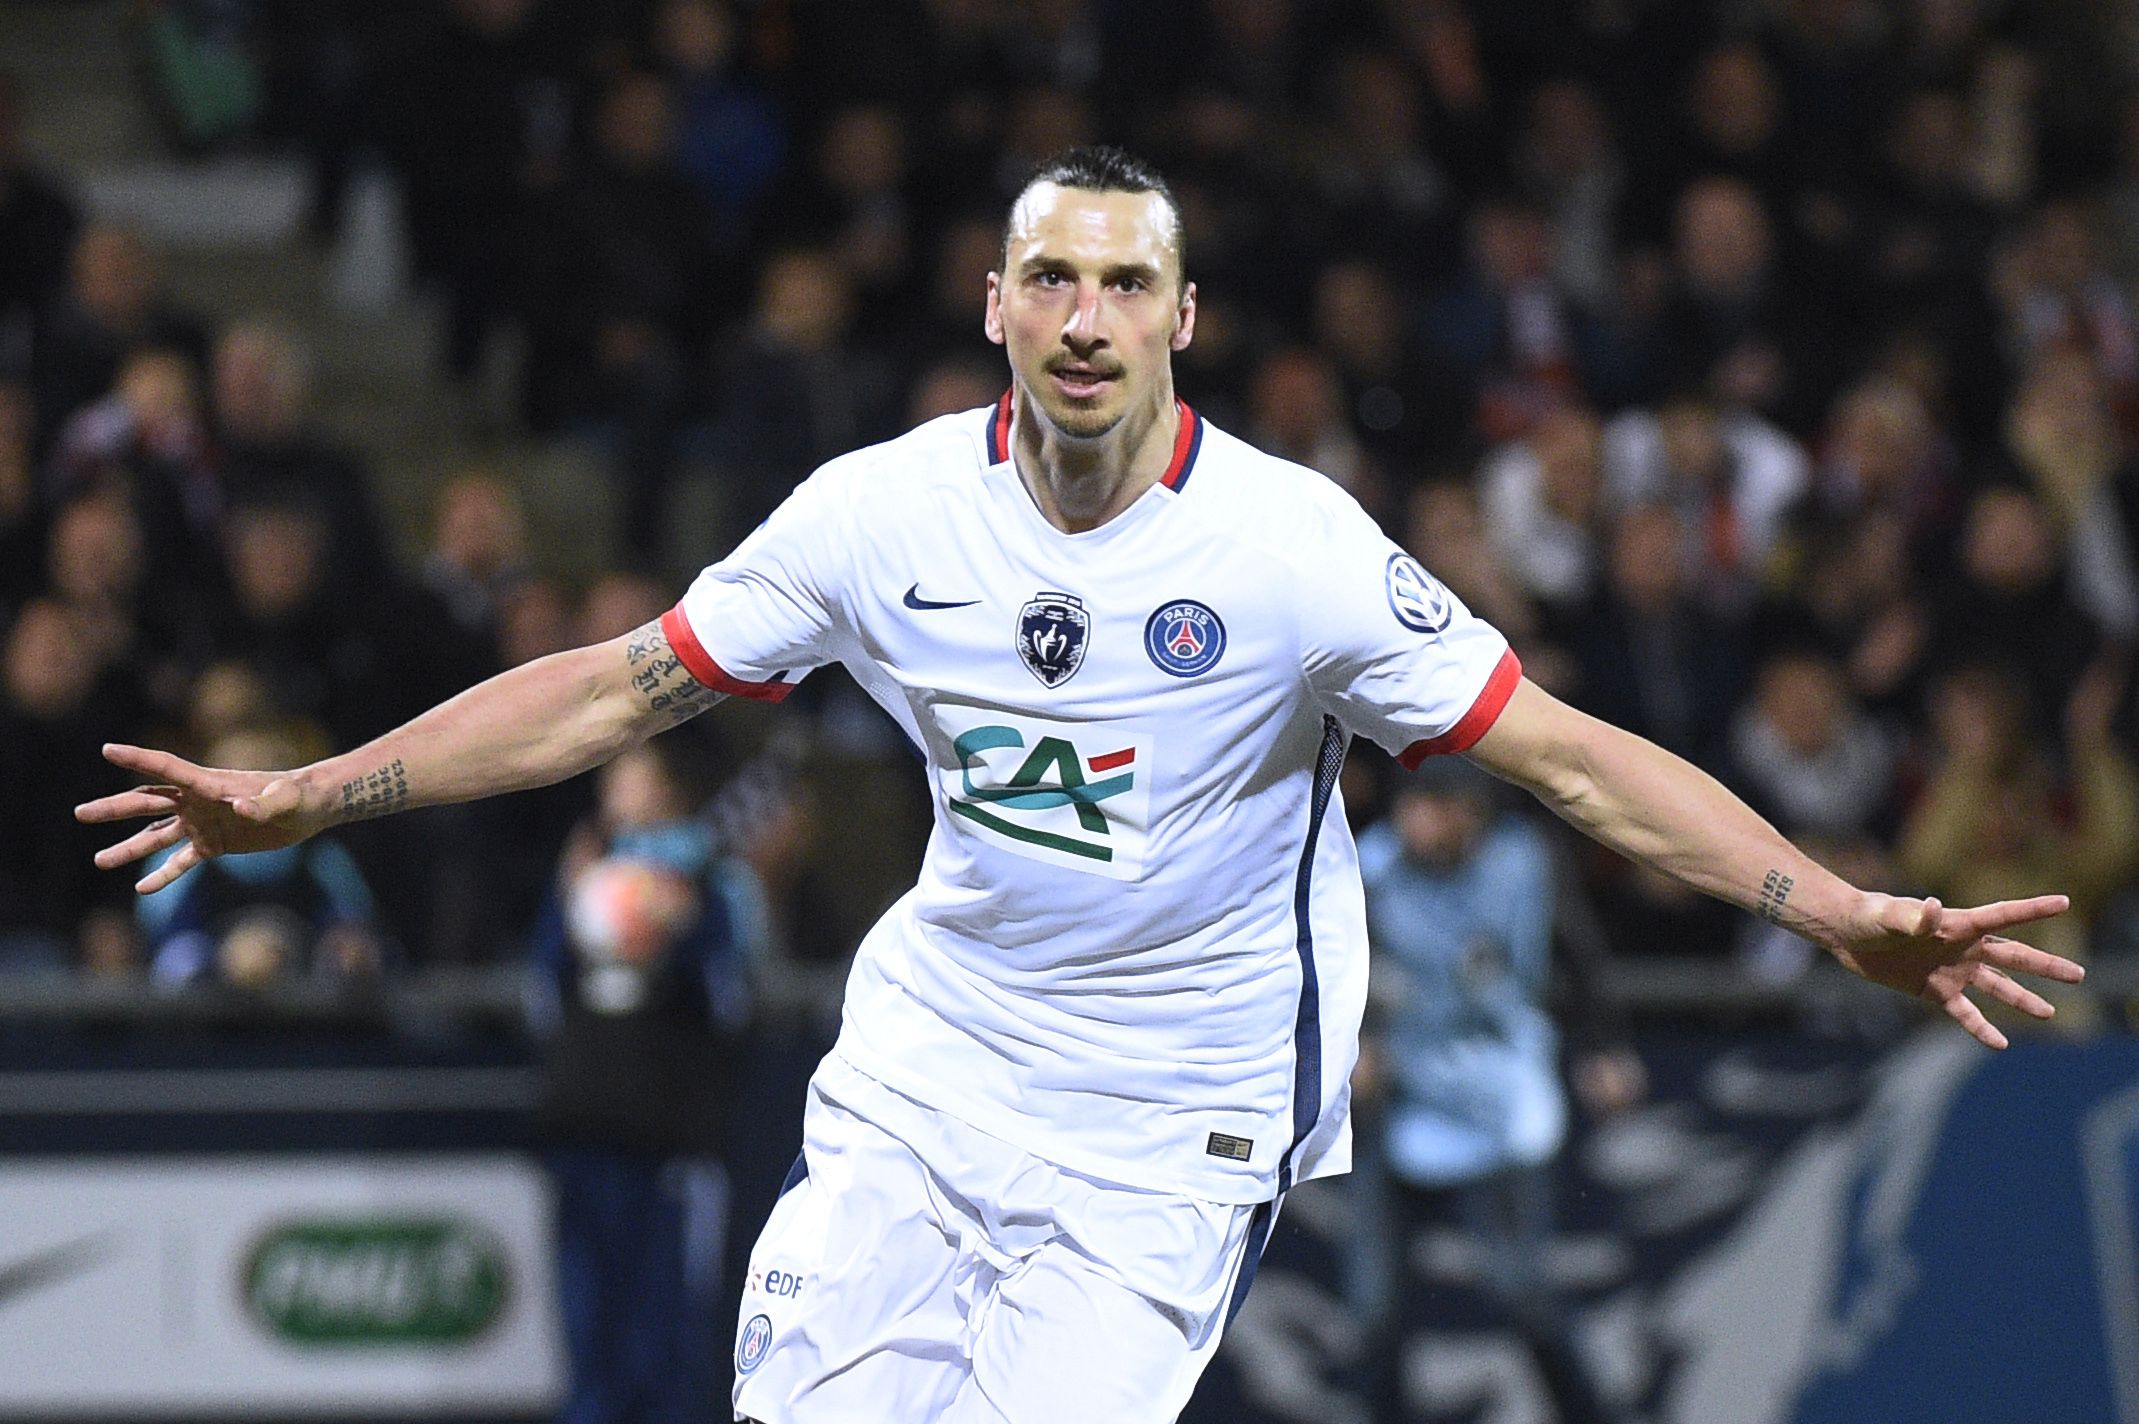 Zlatan Ibrahimovic is one of a bevy of stars Paris Saint-Germain has been able to attract